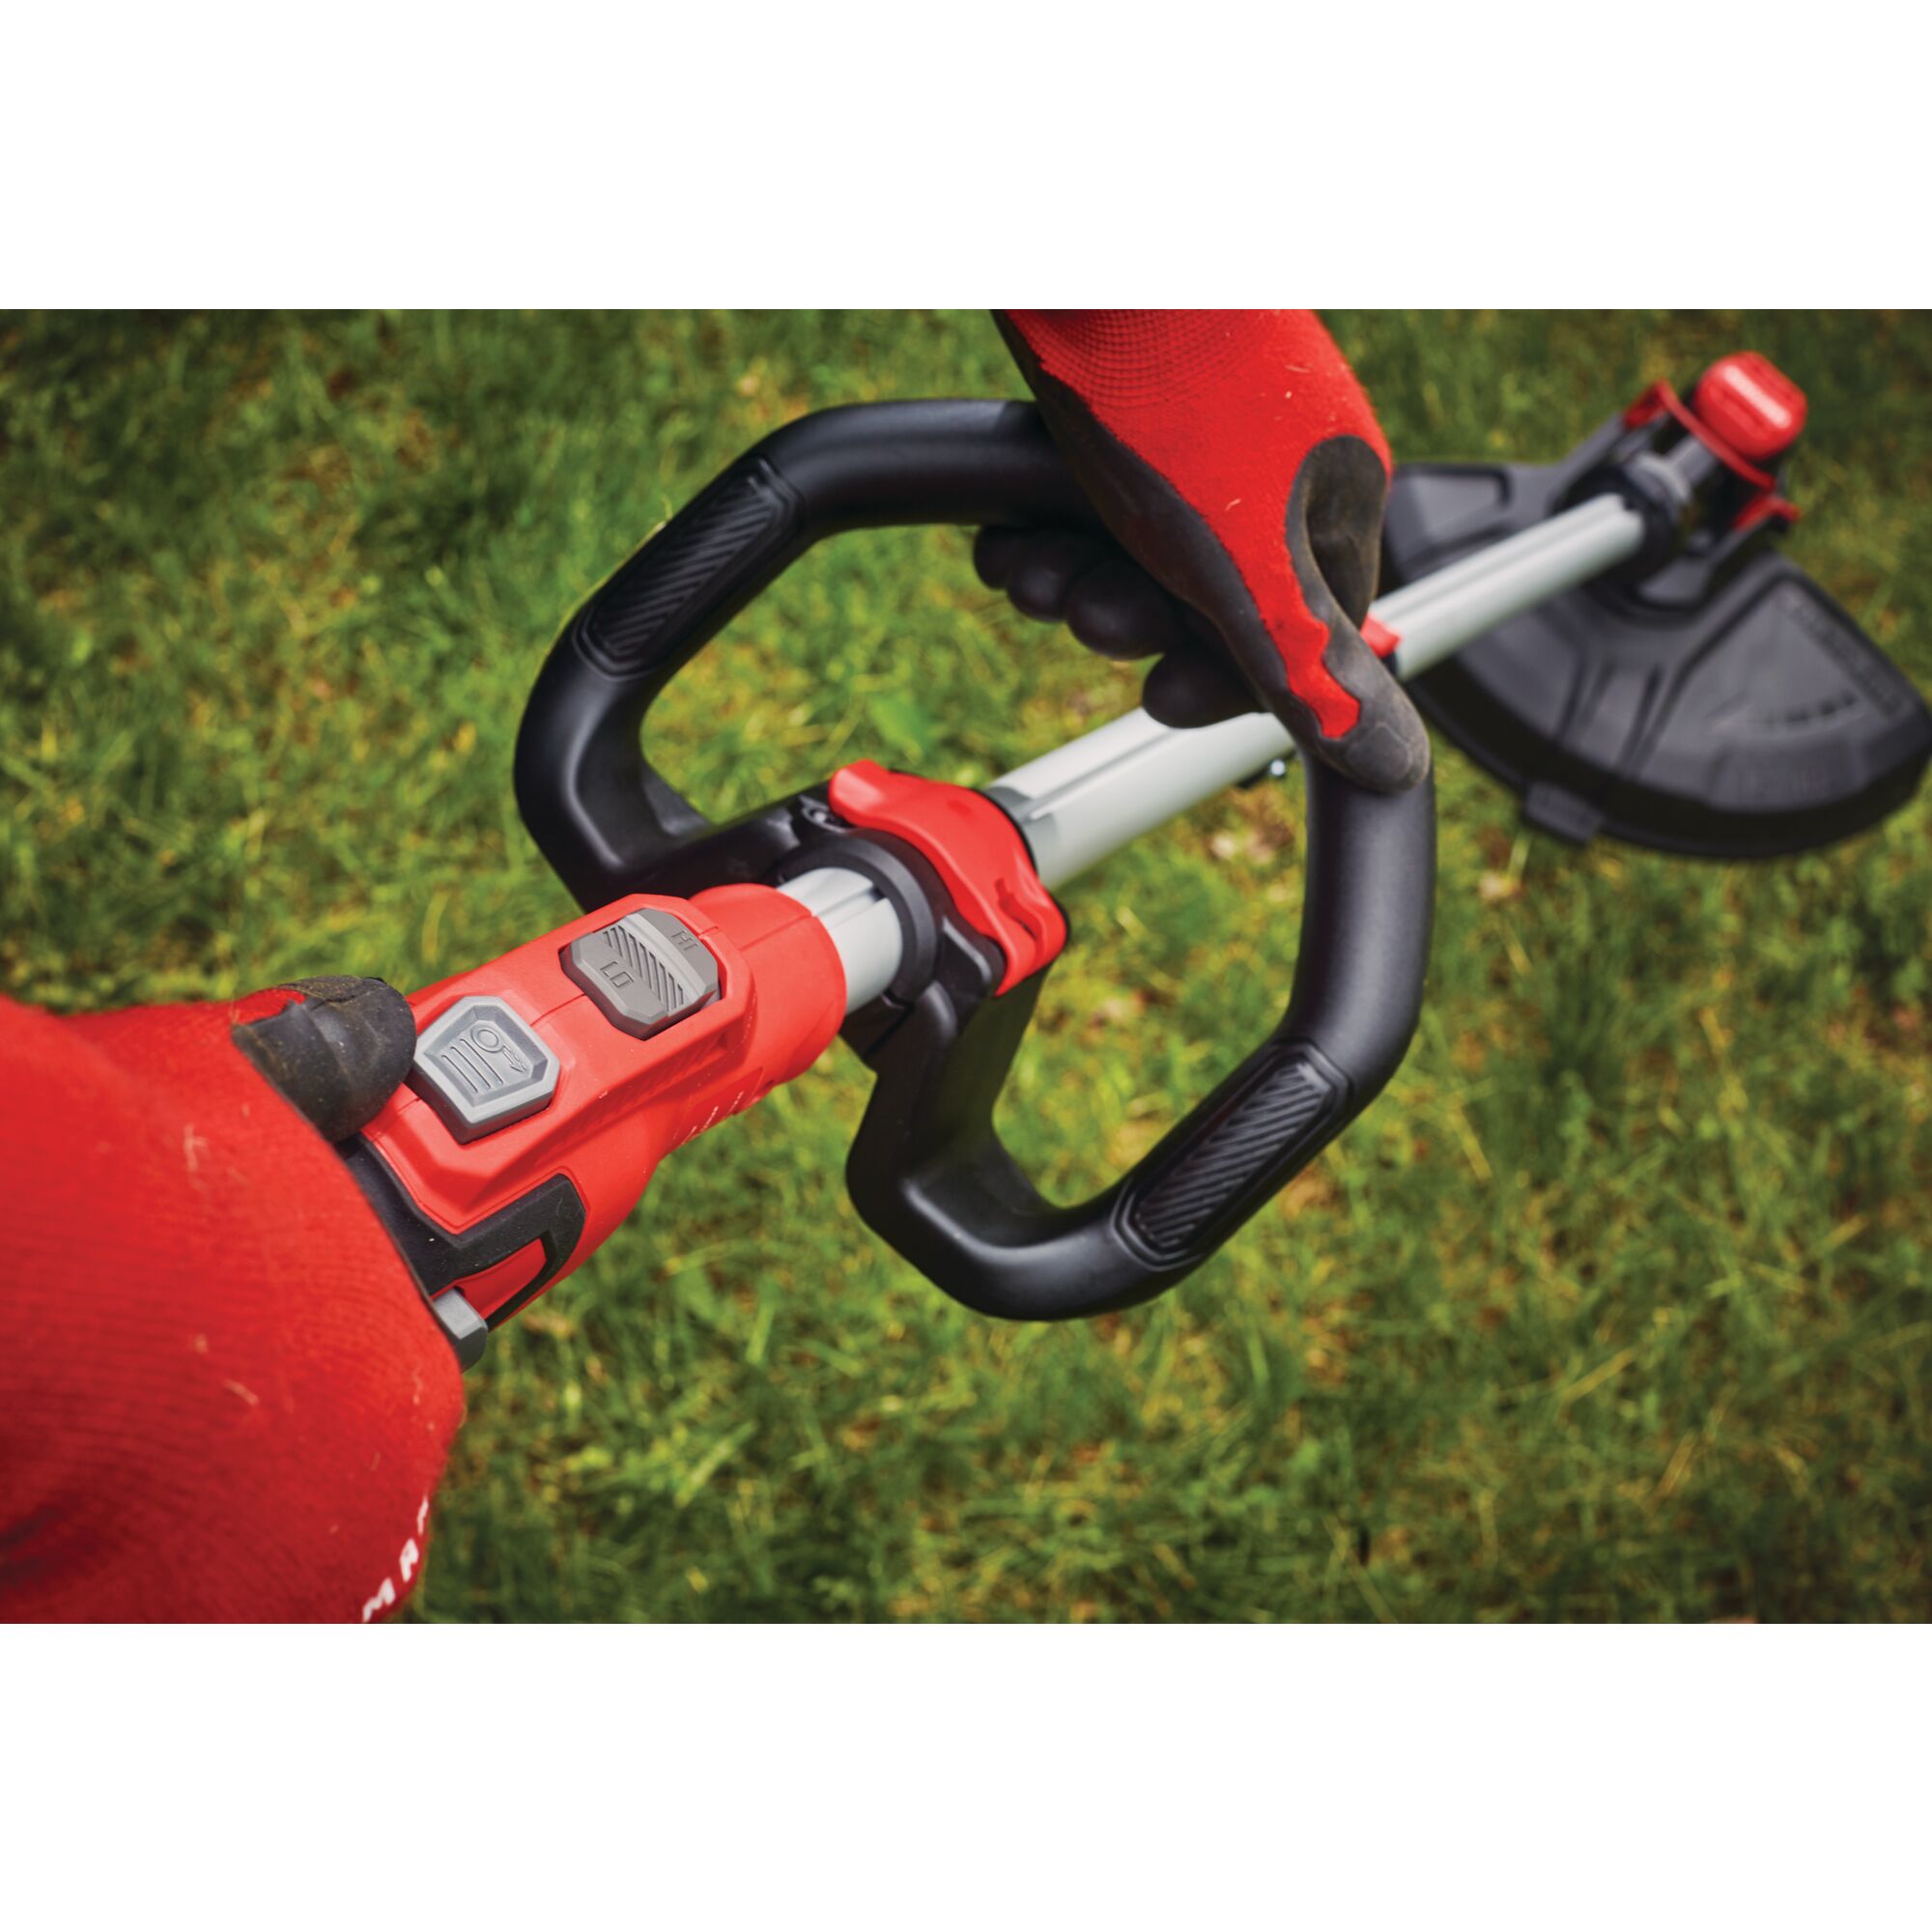 Line feed control feature of 20 volt weedwacker 13 inch cordless string trimmer and edger with push button feed kit.